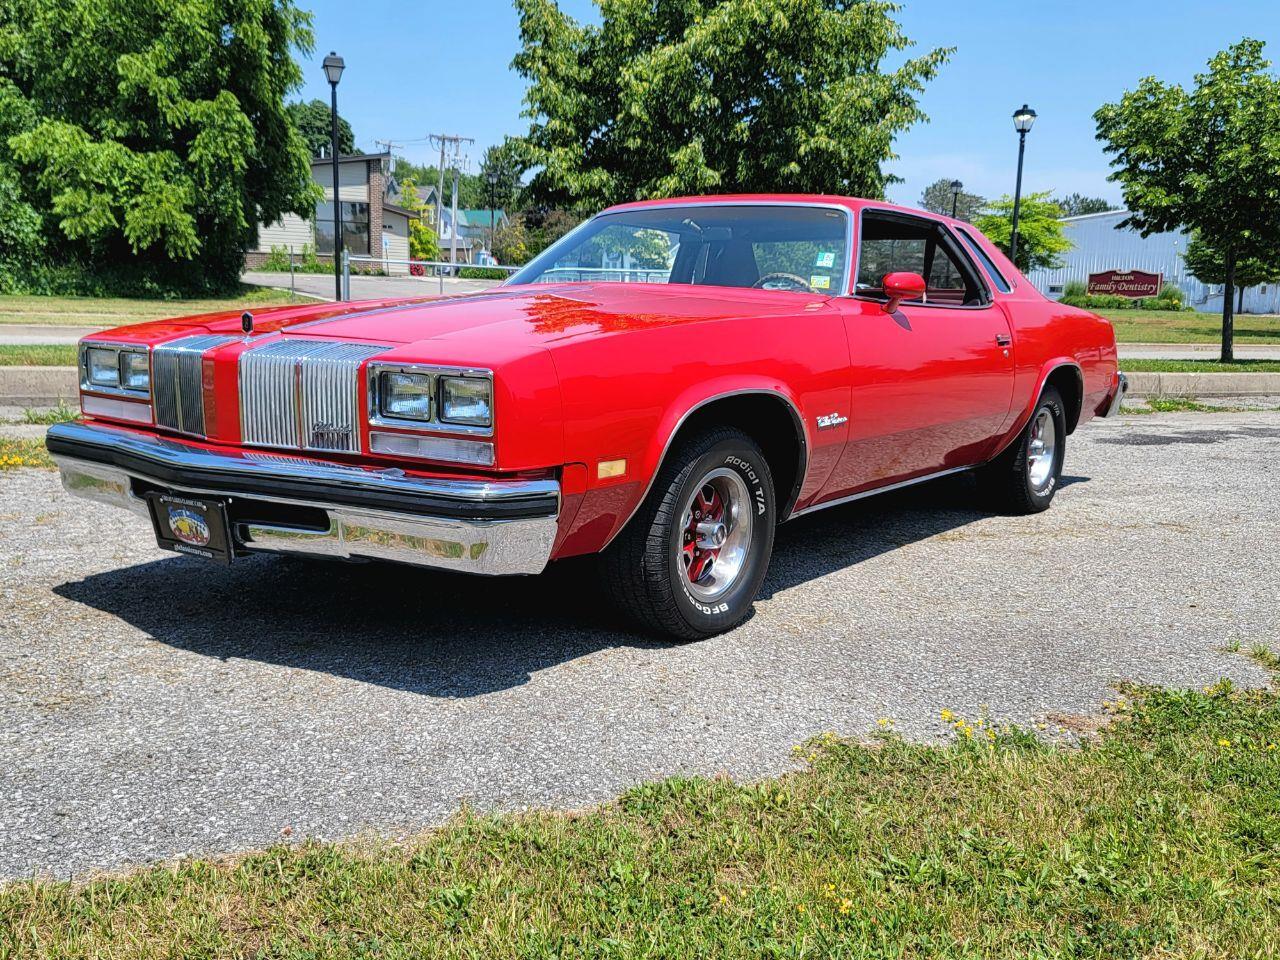 For Sale: 1976 Oldsmobile Cutlass in Hilton, New York for sale in Hilton, NY